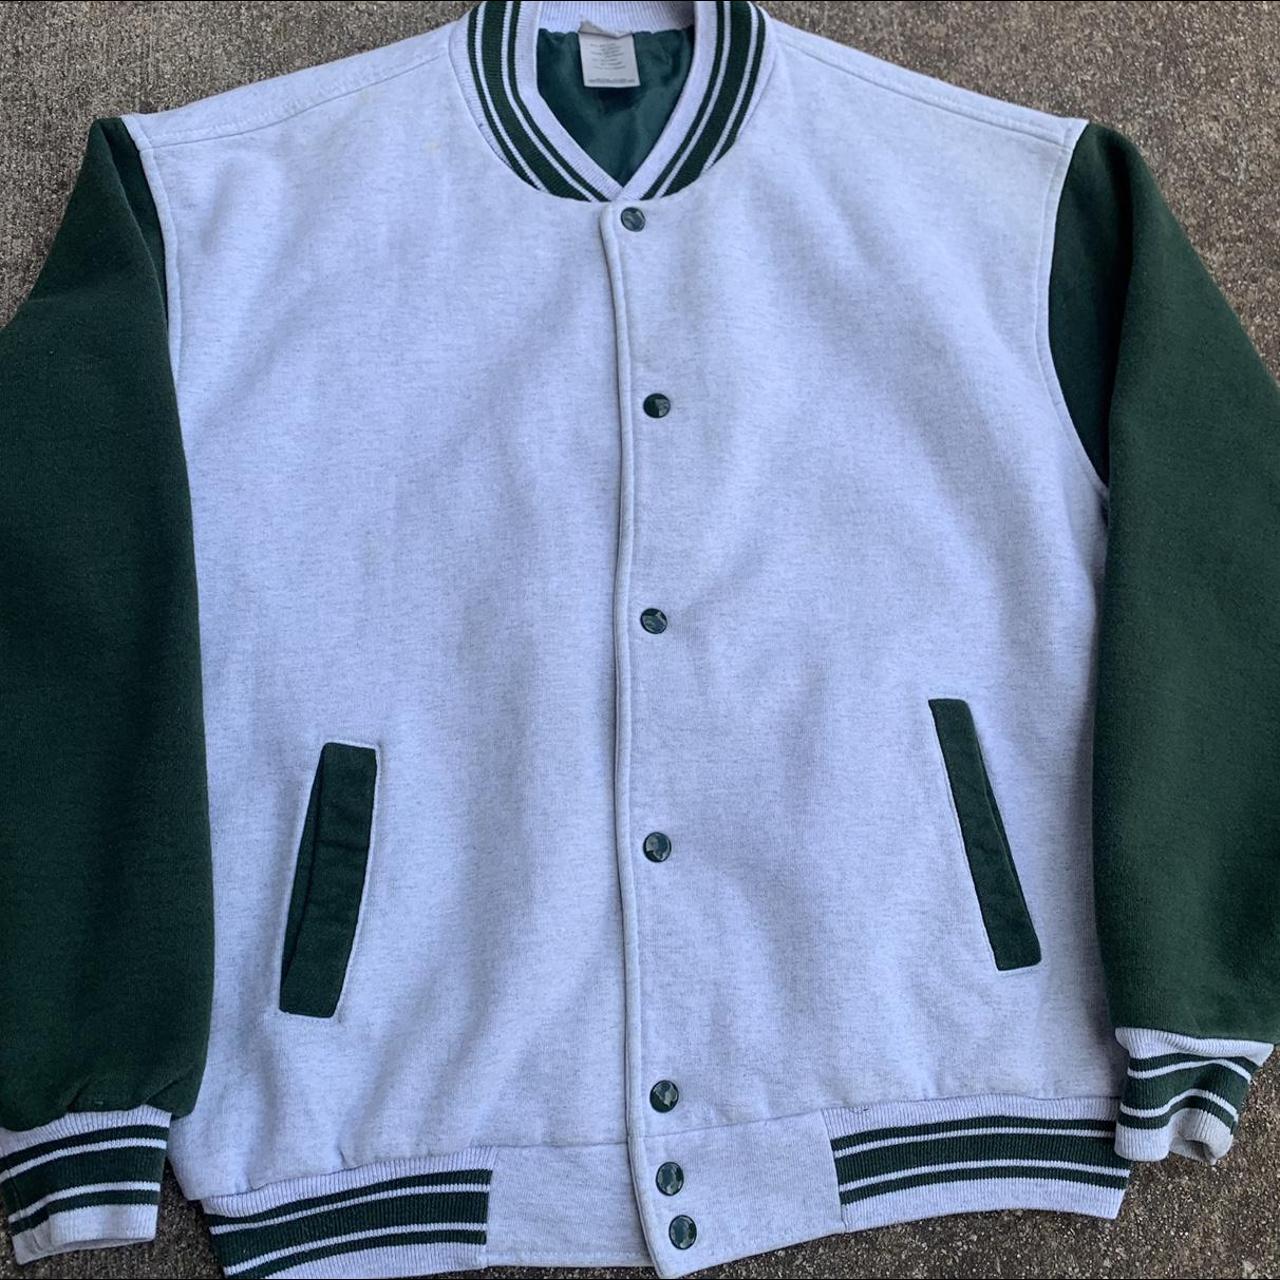 American Vintage Men's Green and White Jacket (2)